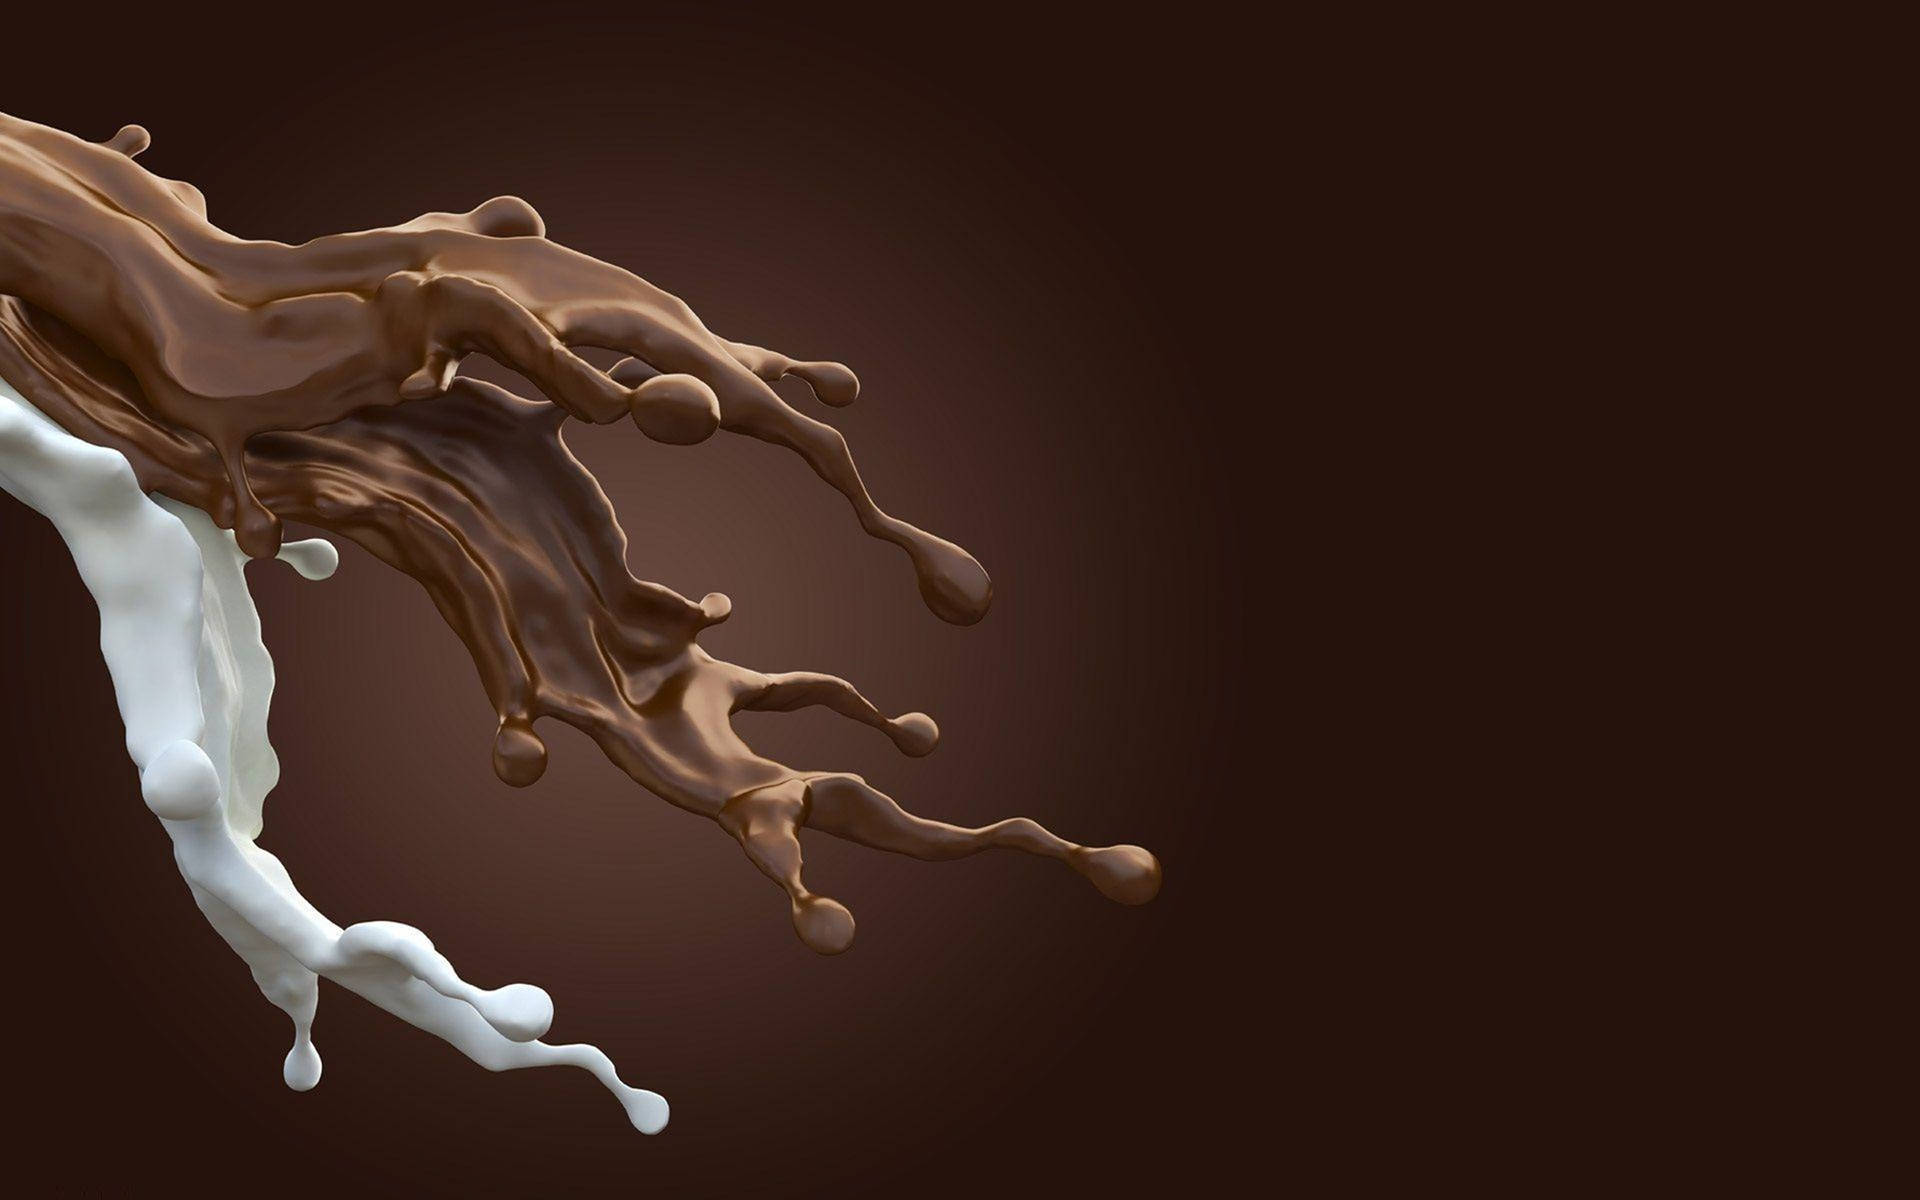 Download White Dairy And Chocolate Milk Digital Art Wallpaper | Wallpapers .com